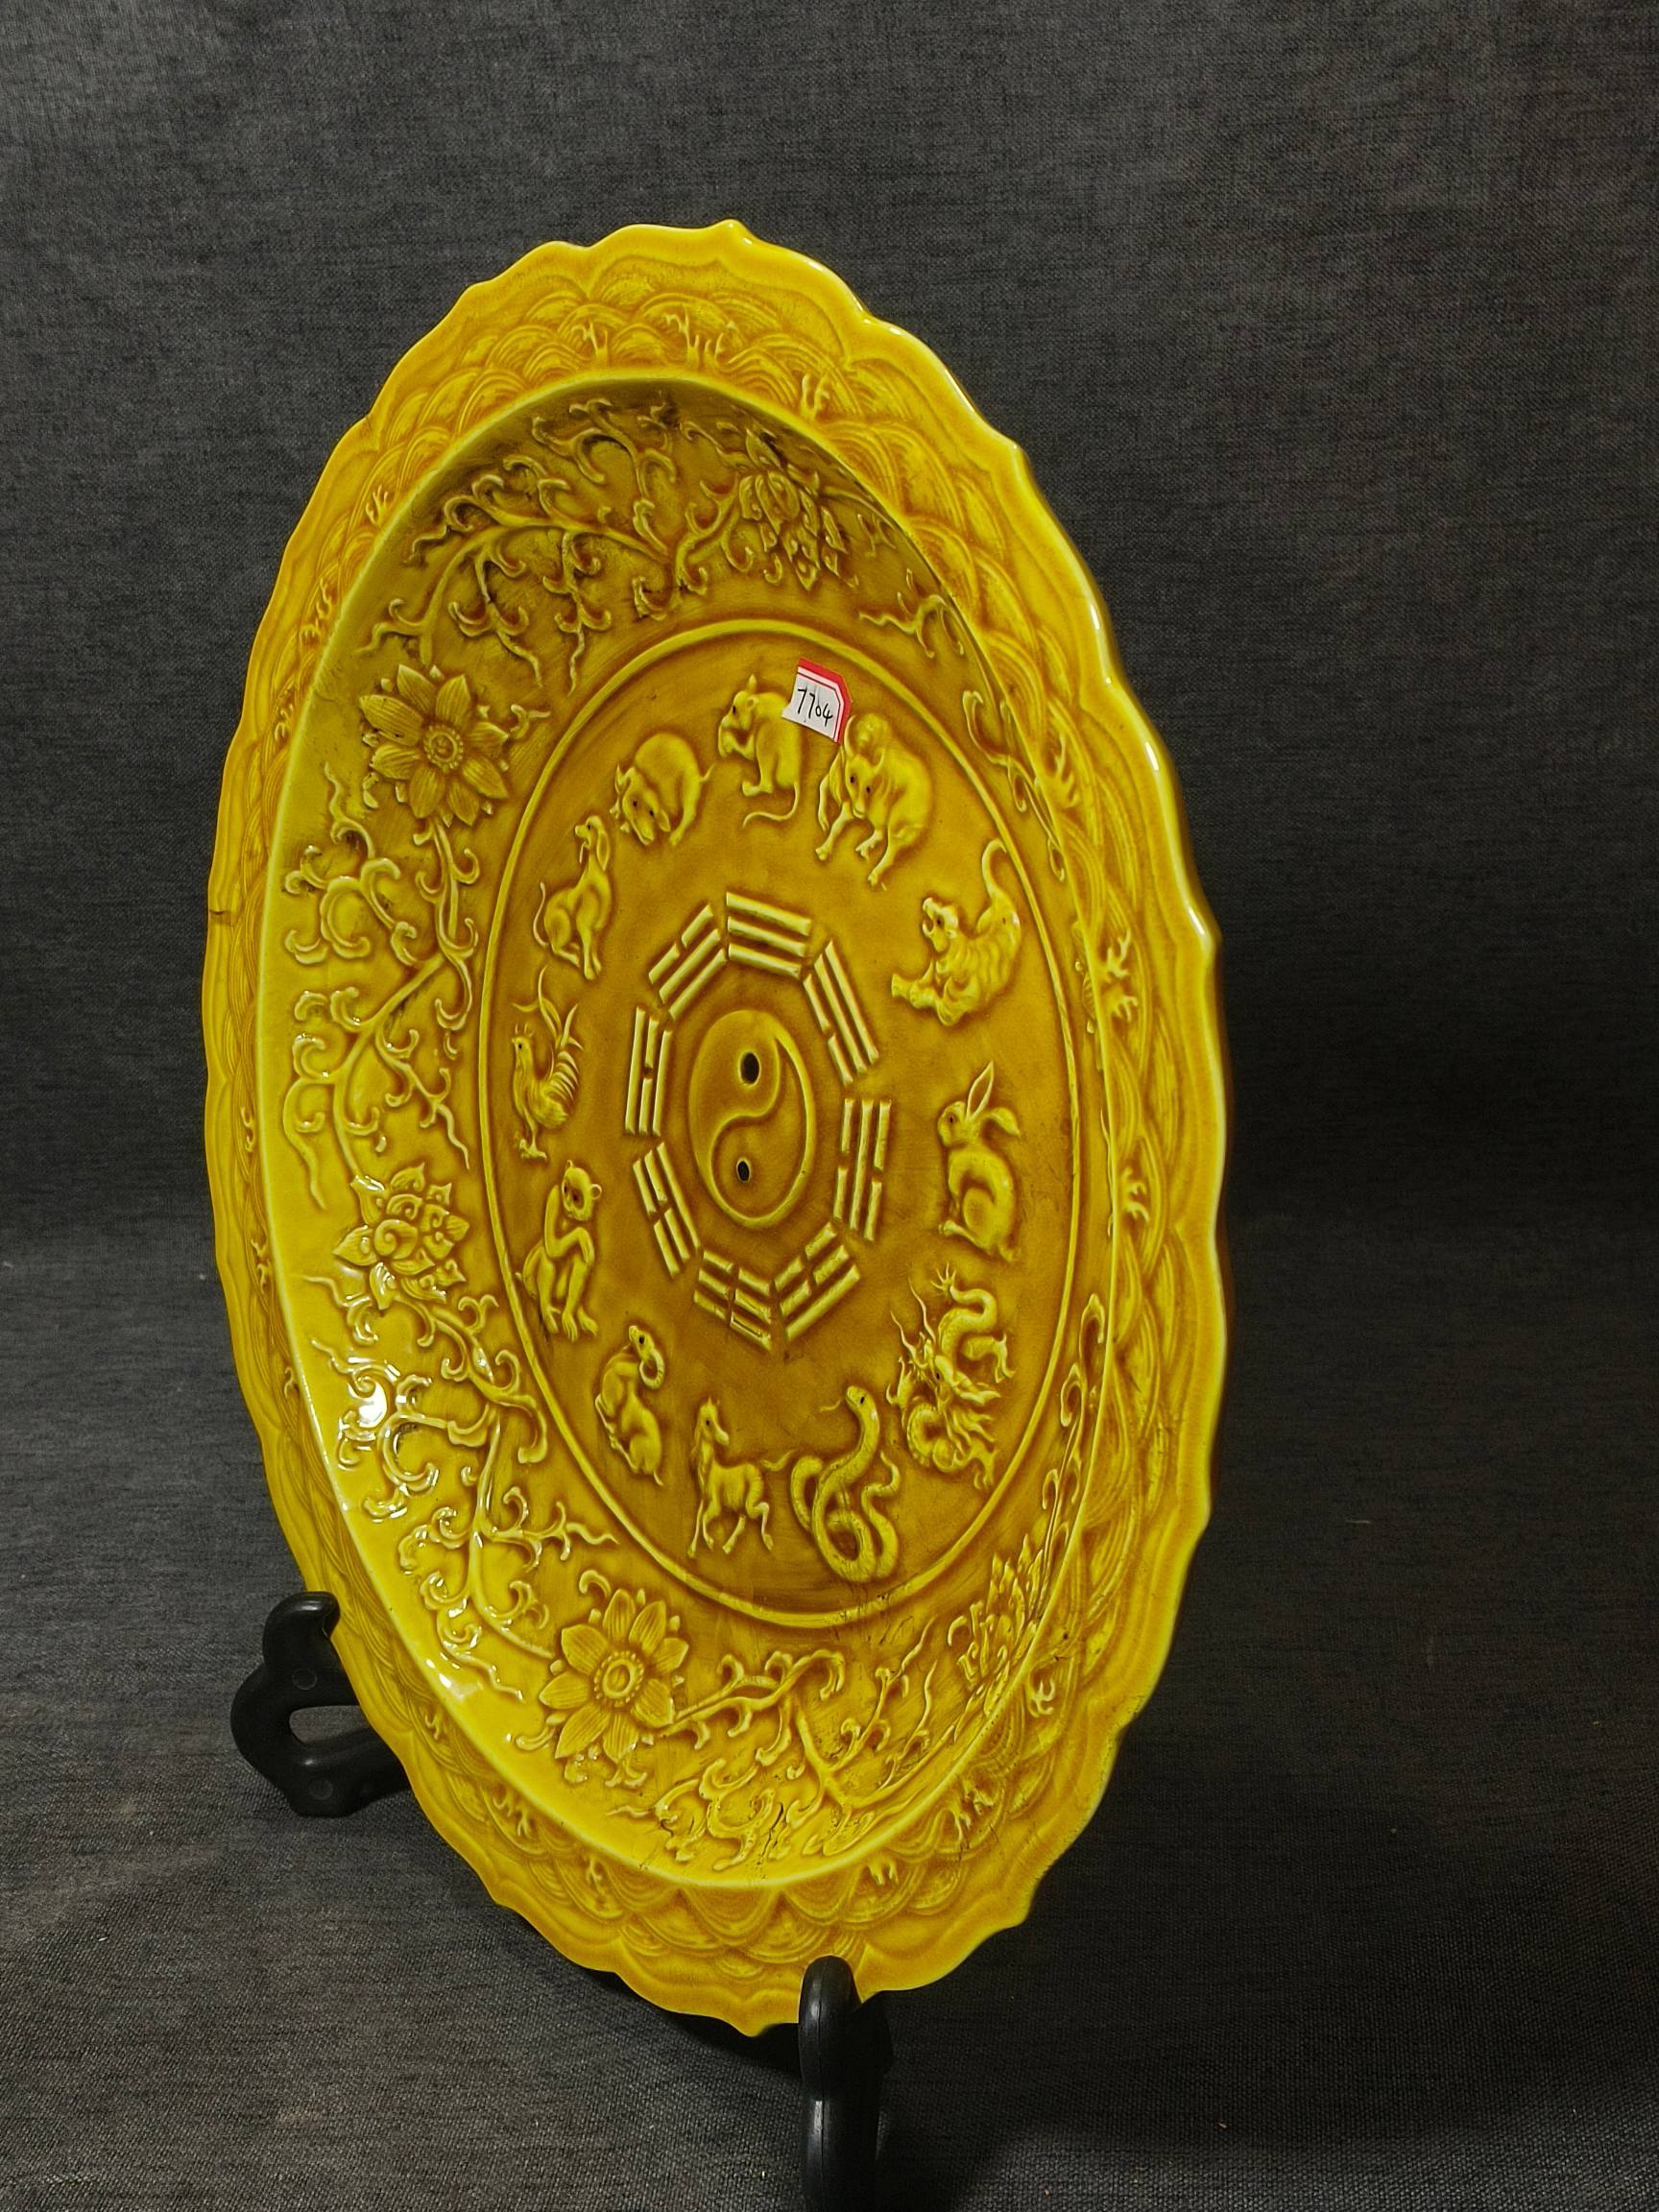 Imperial yellow-glazed porcelain plate with carved [Twelve Zodiac, Bagua] patterns made in the Hongz - Image 6 of 8